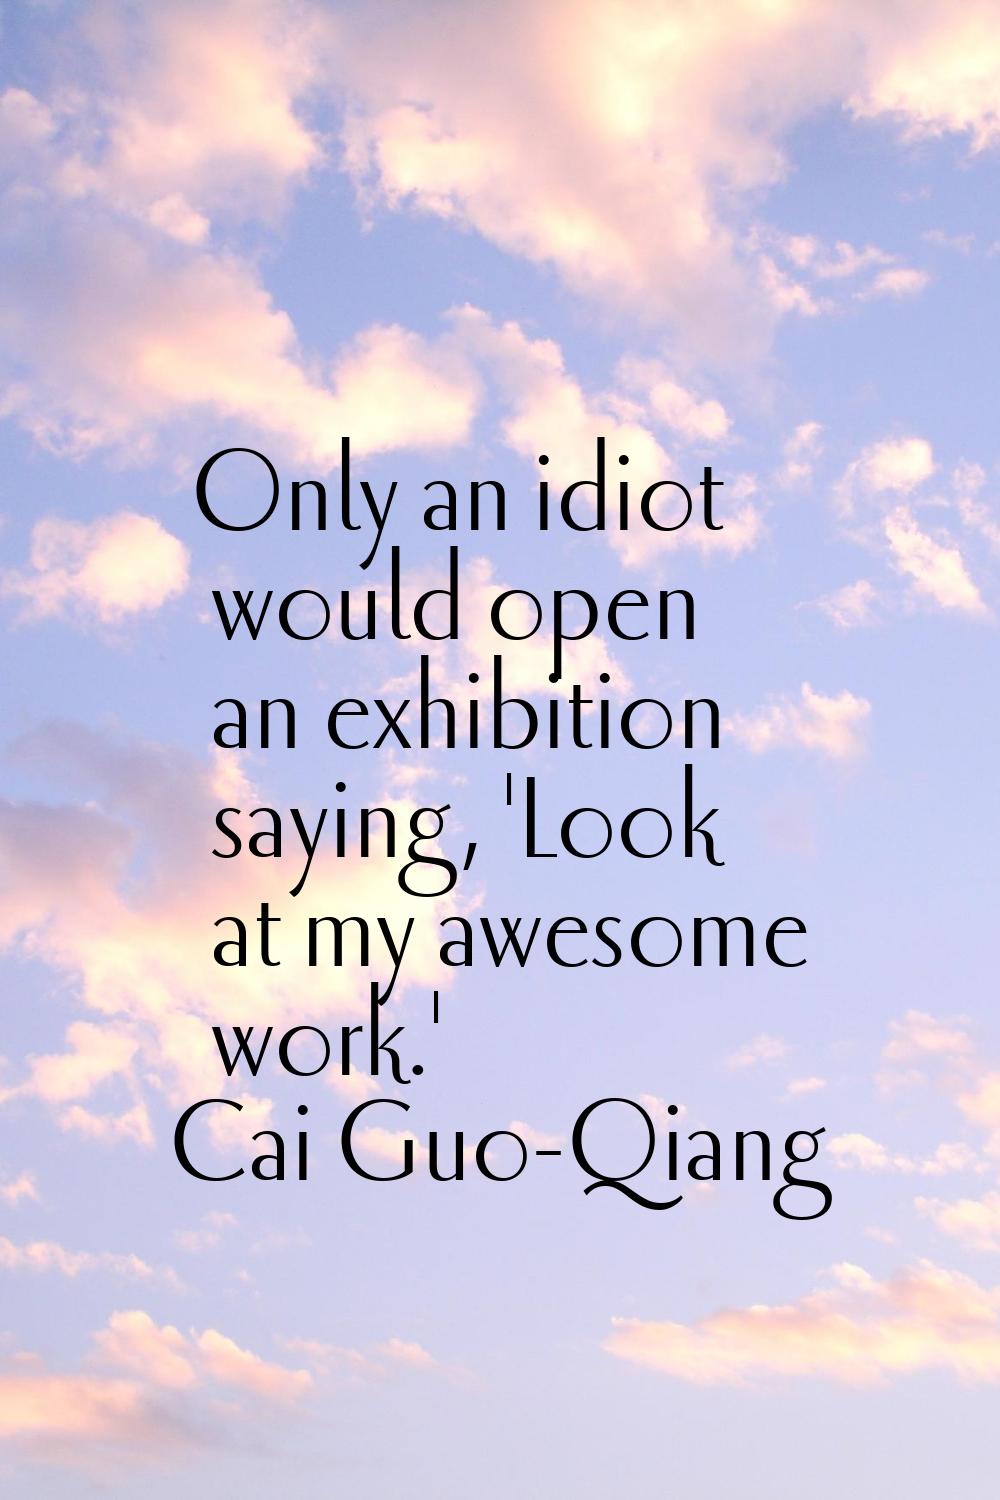 Only an idiot would open an exhibition saying, 'Look at my awesome work.'